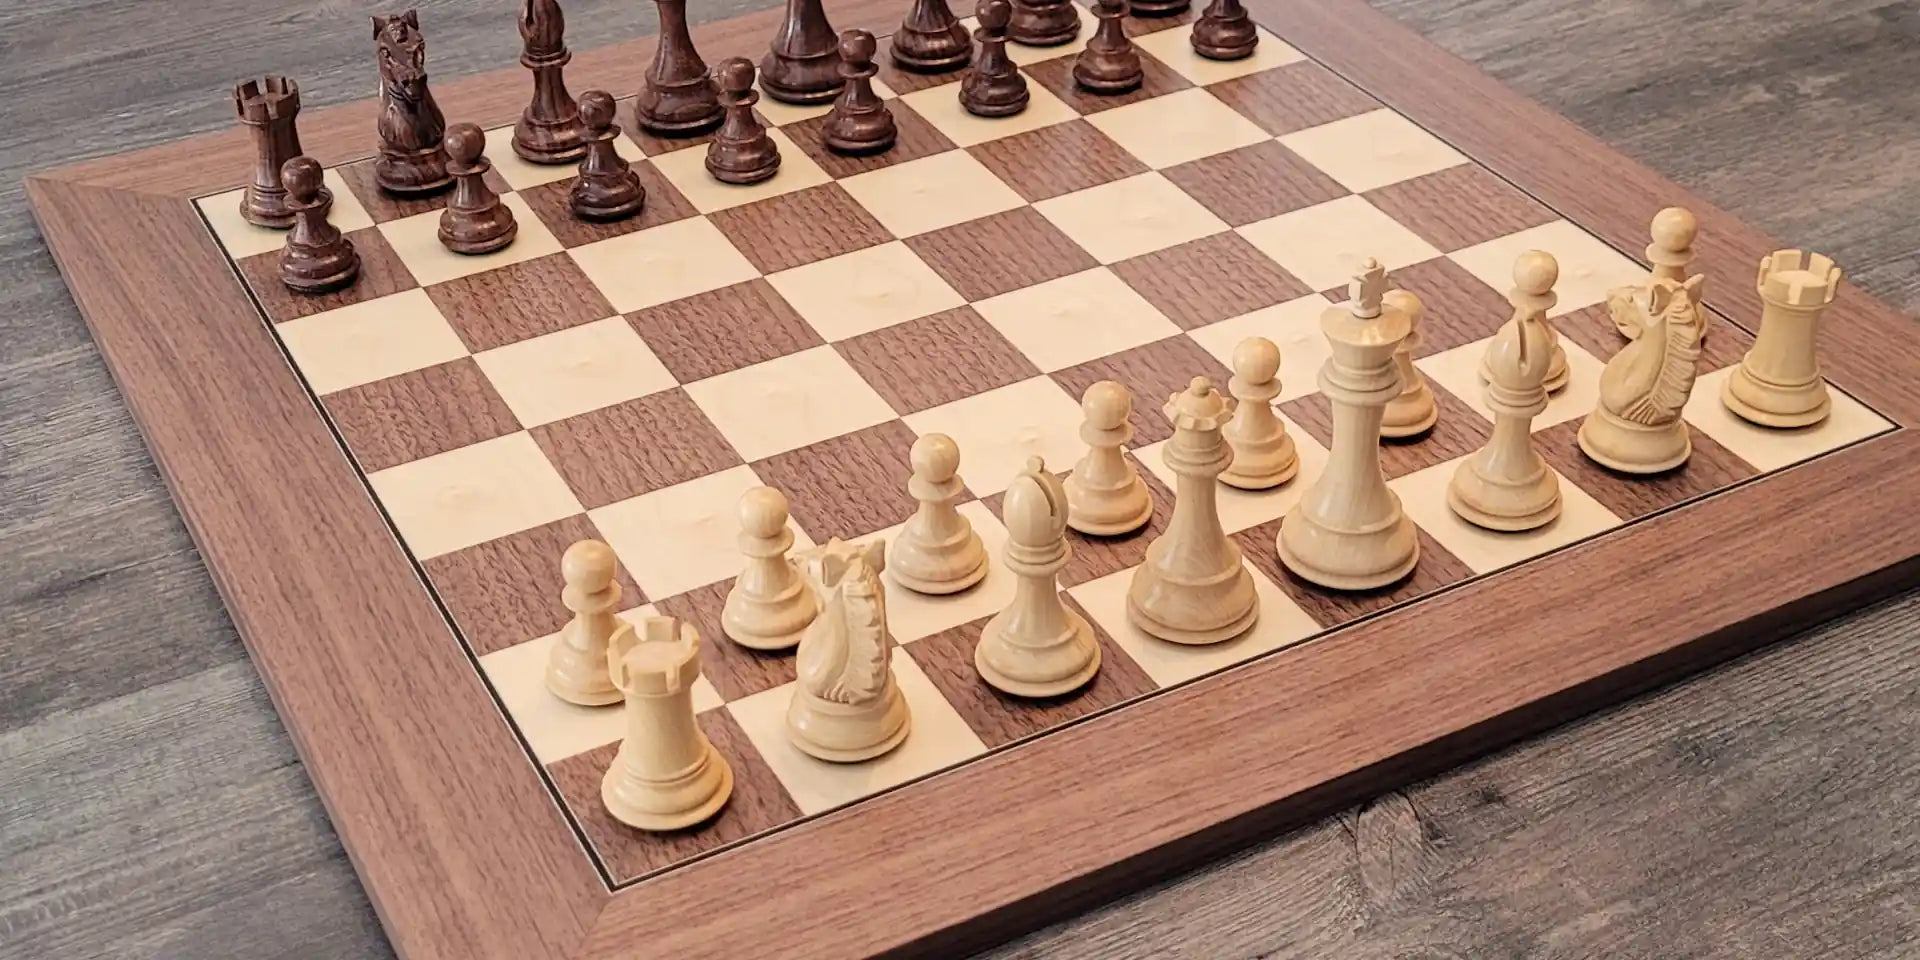 Walnut chess board with Alban Knight palisander chess pieces on it